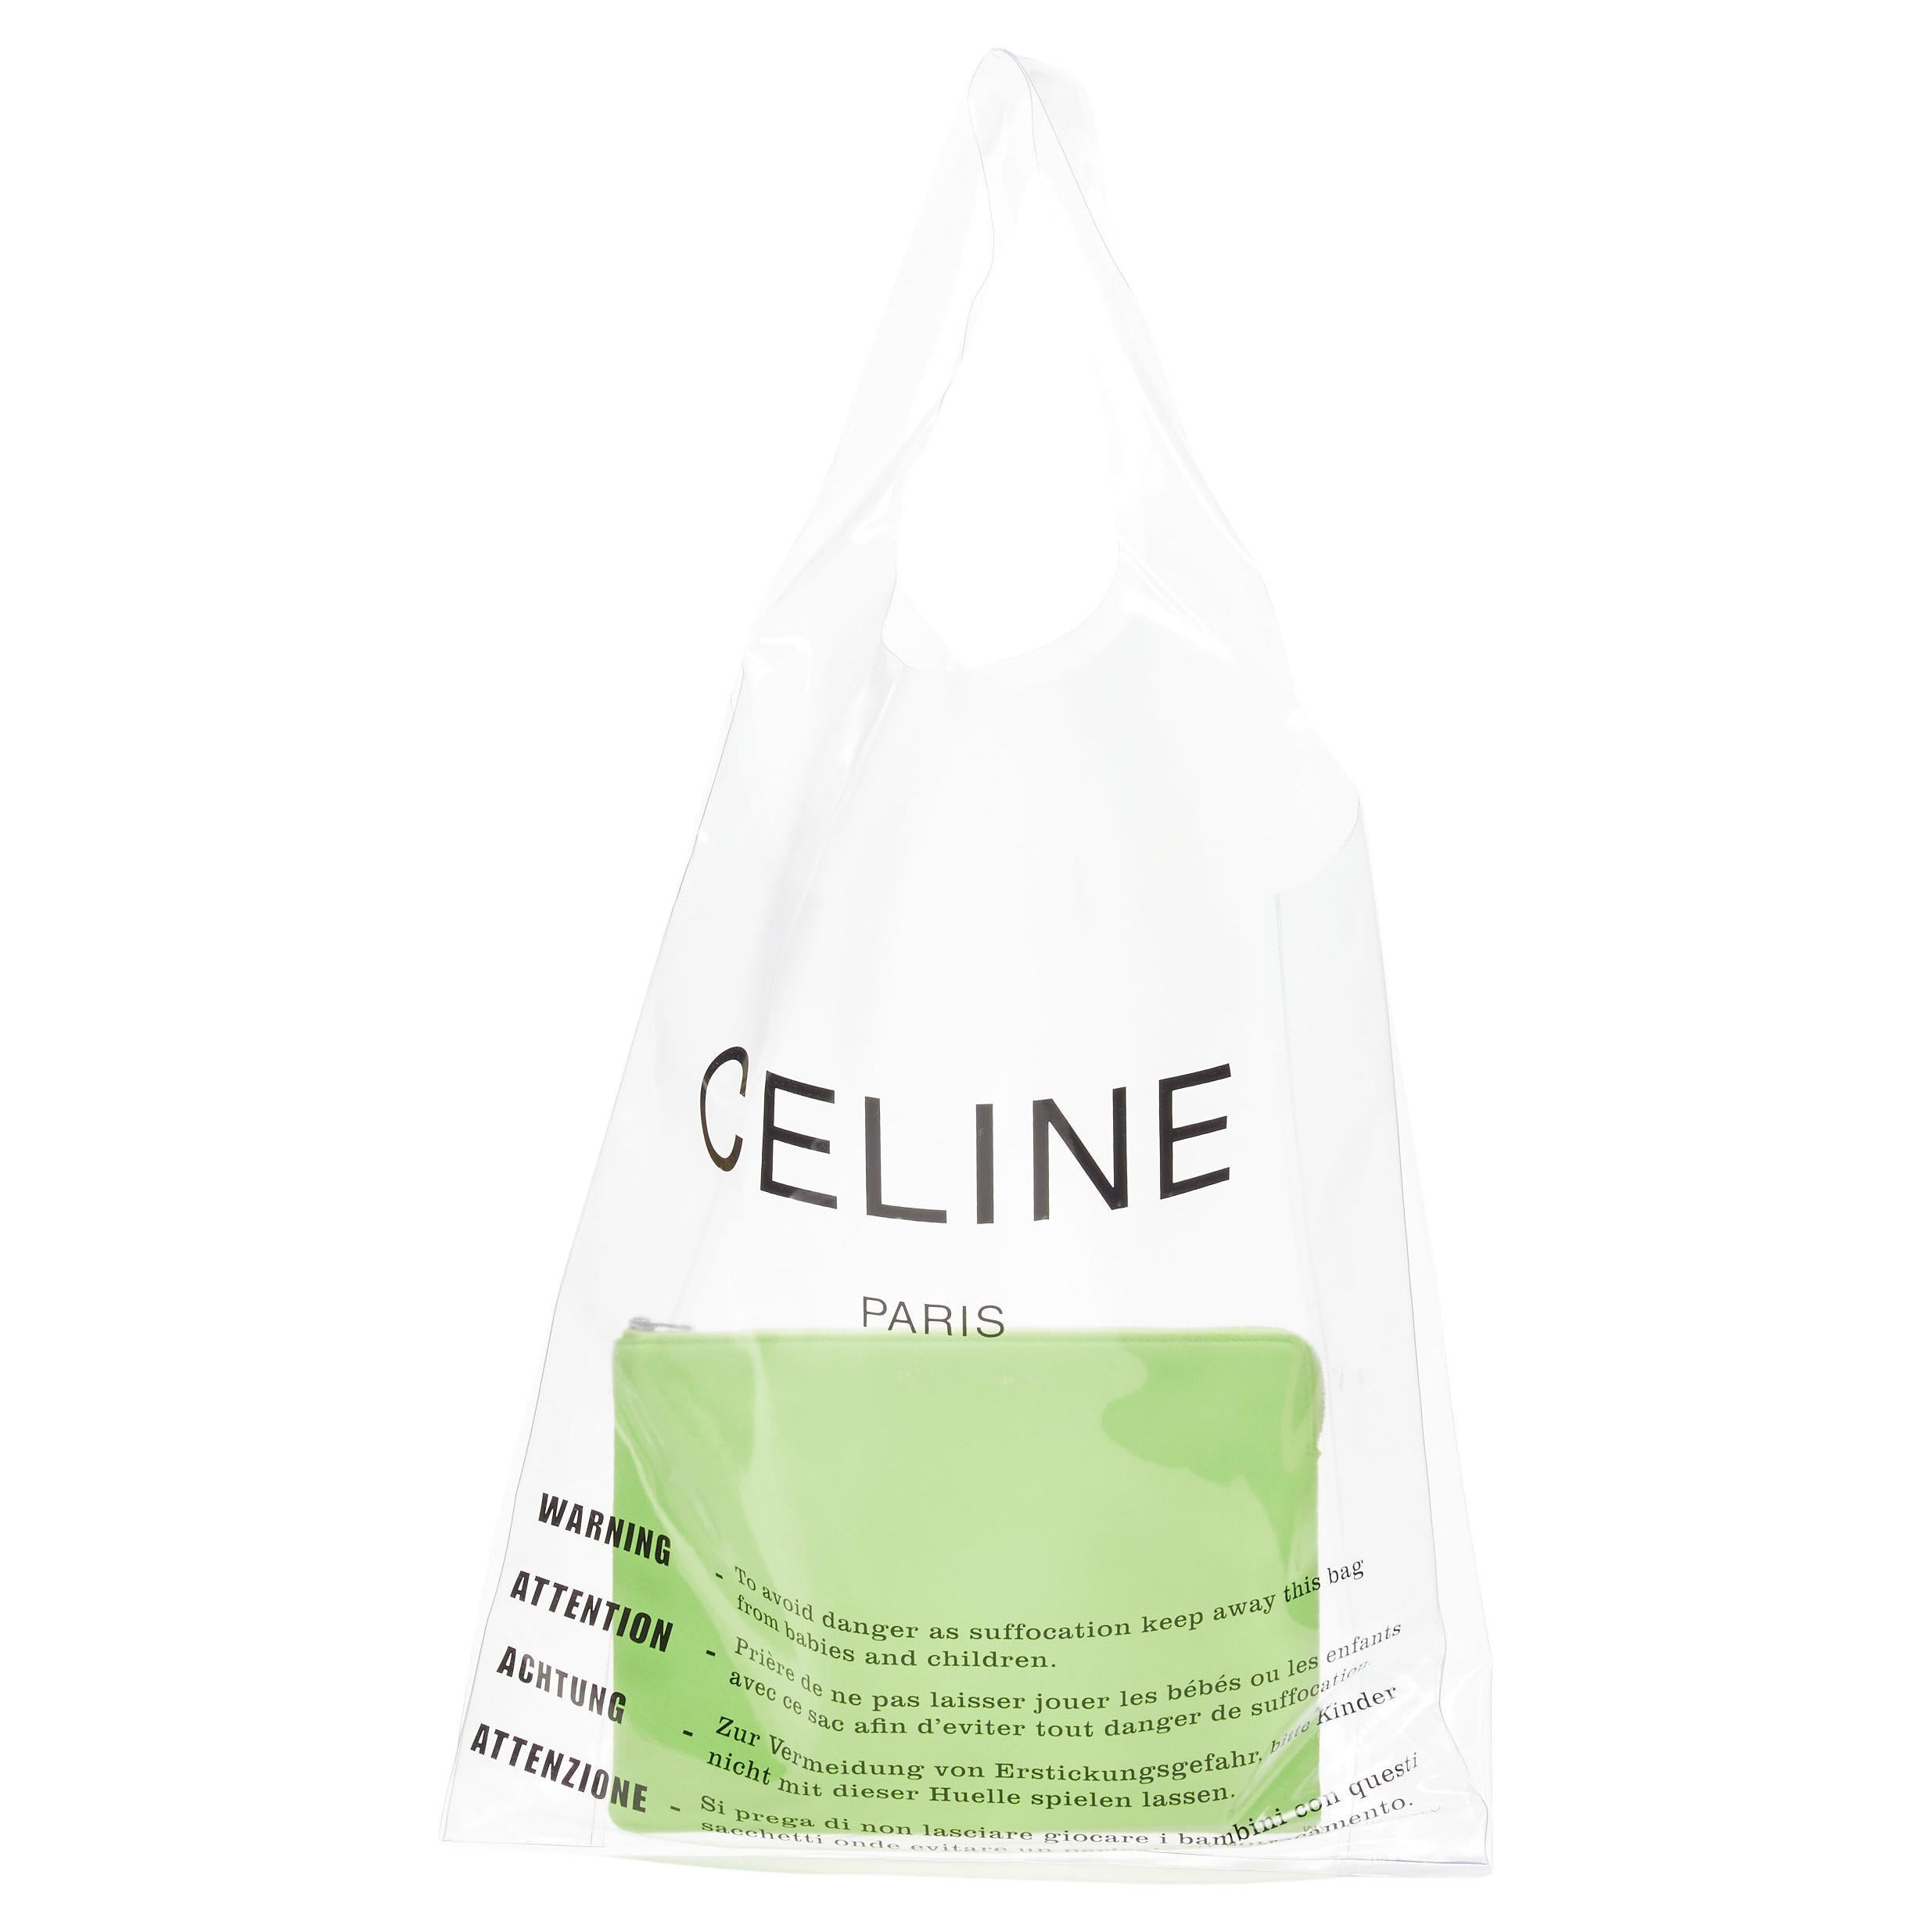 OLD CELINE Phoebe Philo 2018 Lime green zip pouch clear PVC shopper tote bag